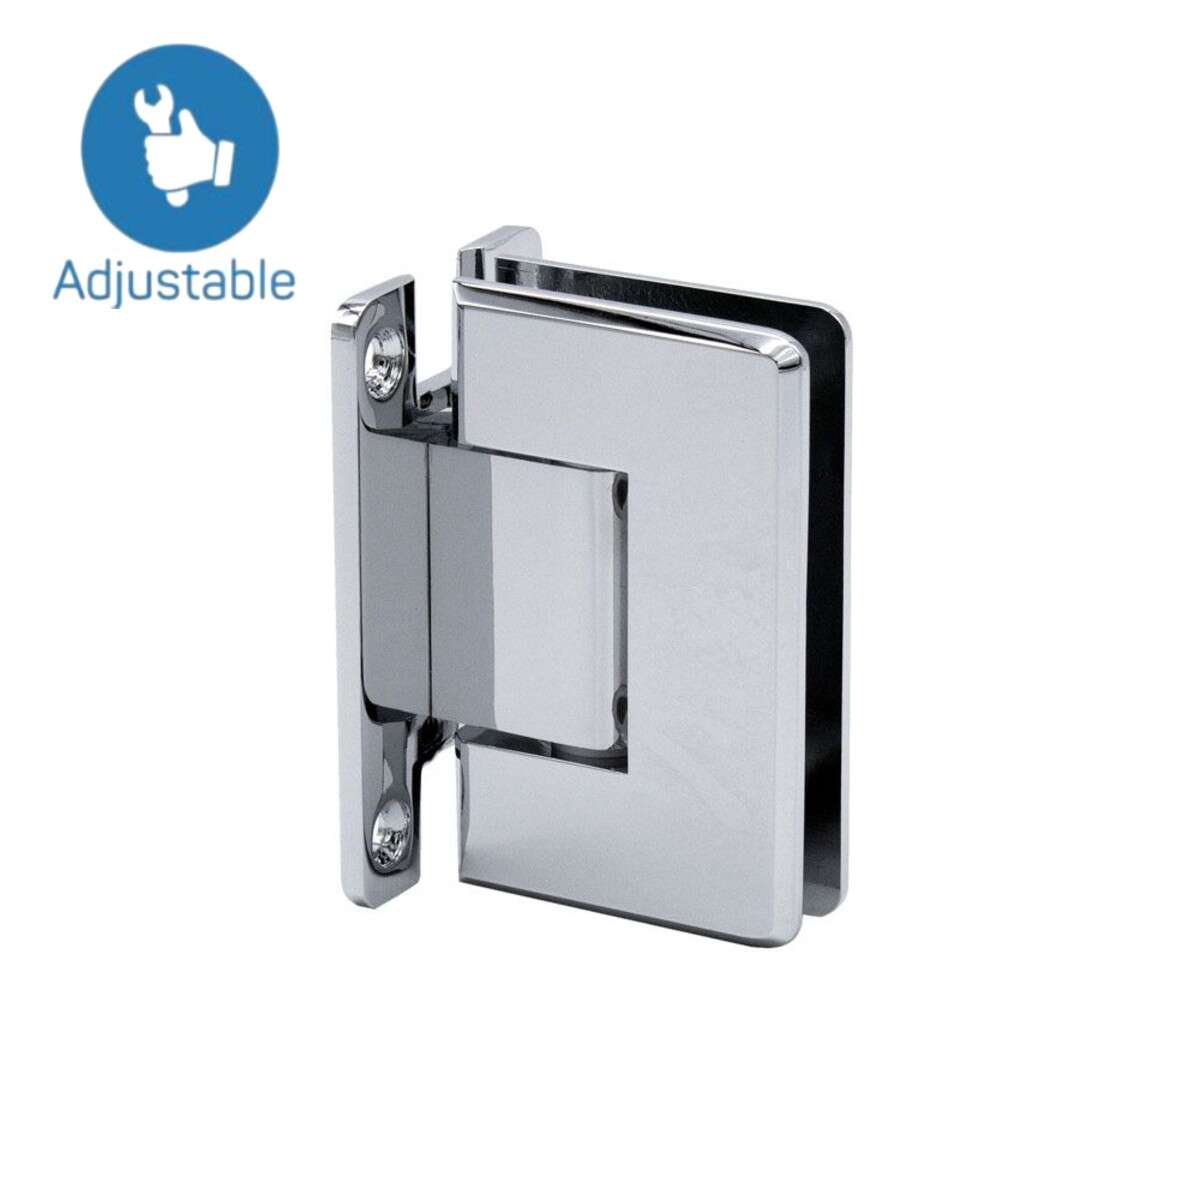 Wall to Glass "H" Back Plate Adjustable Hinge- Beveled